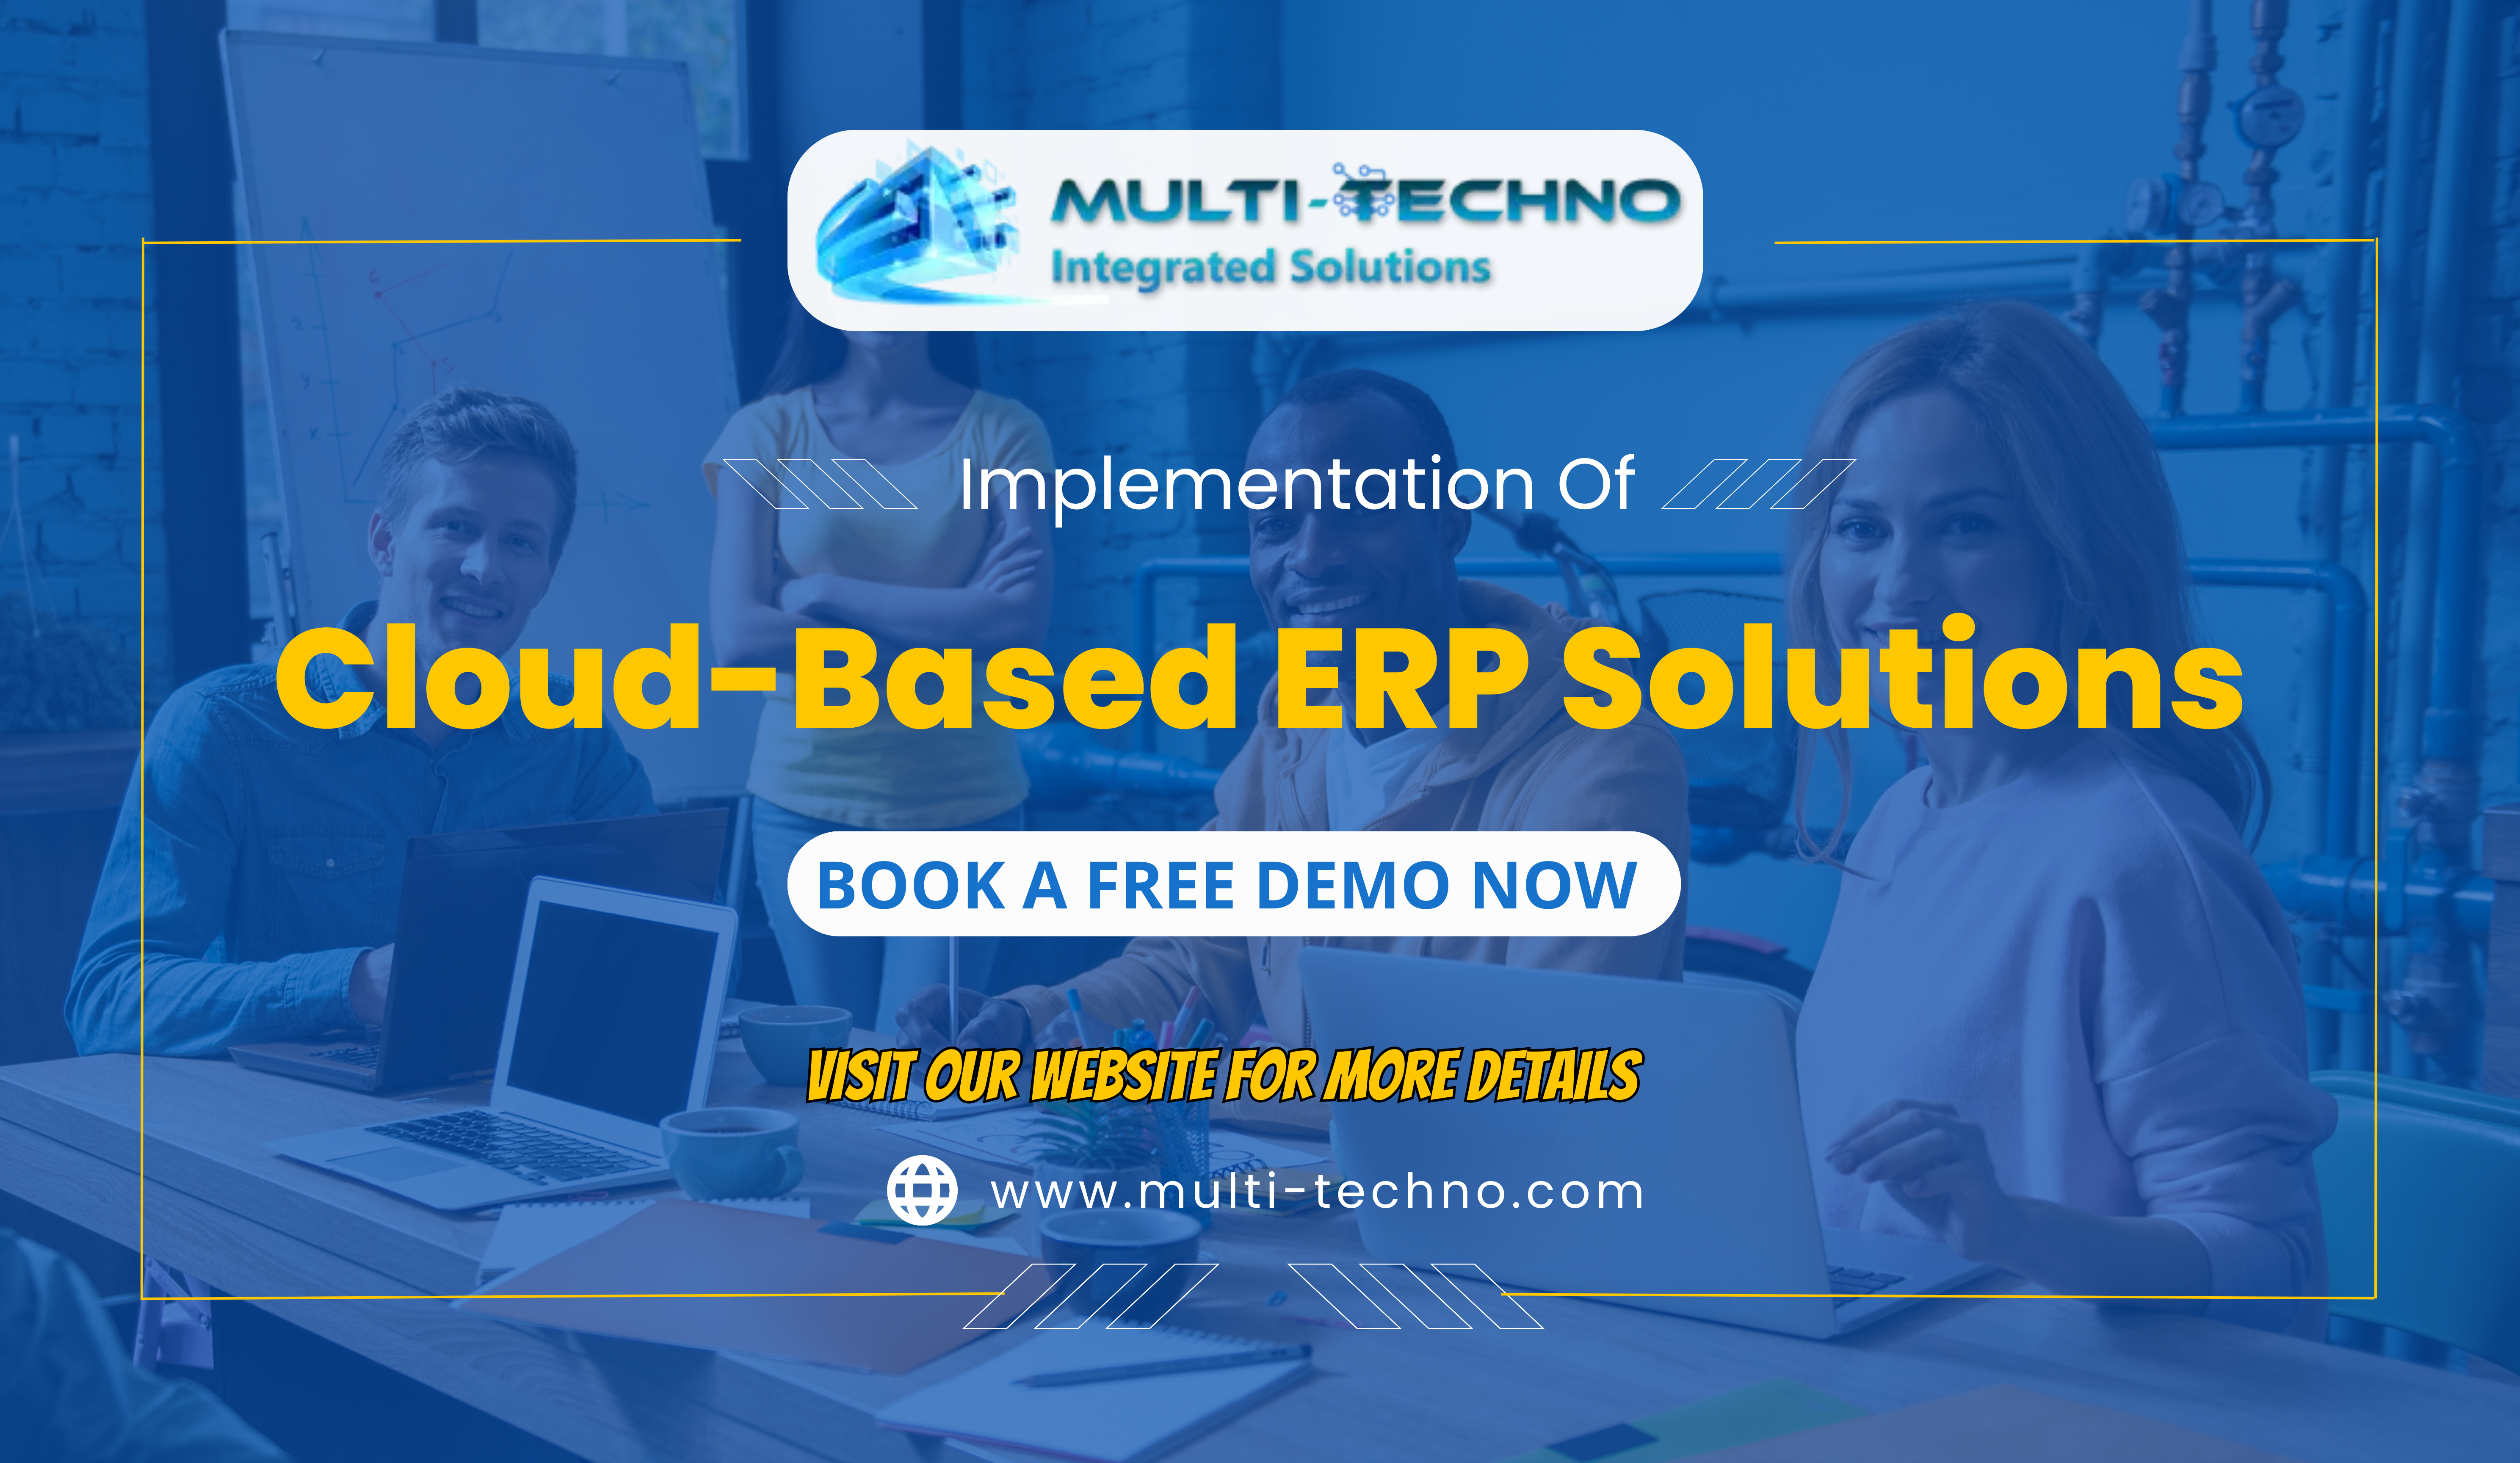 Cloud-Based ERP Solutions - Multi-Techno